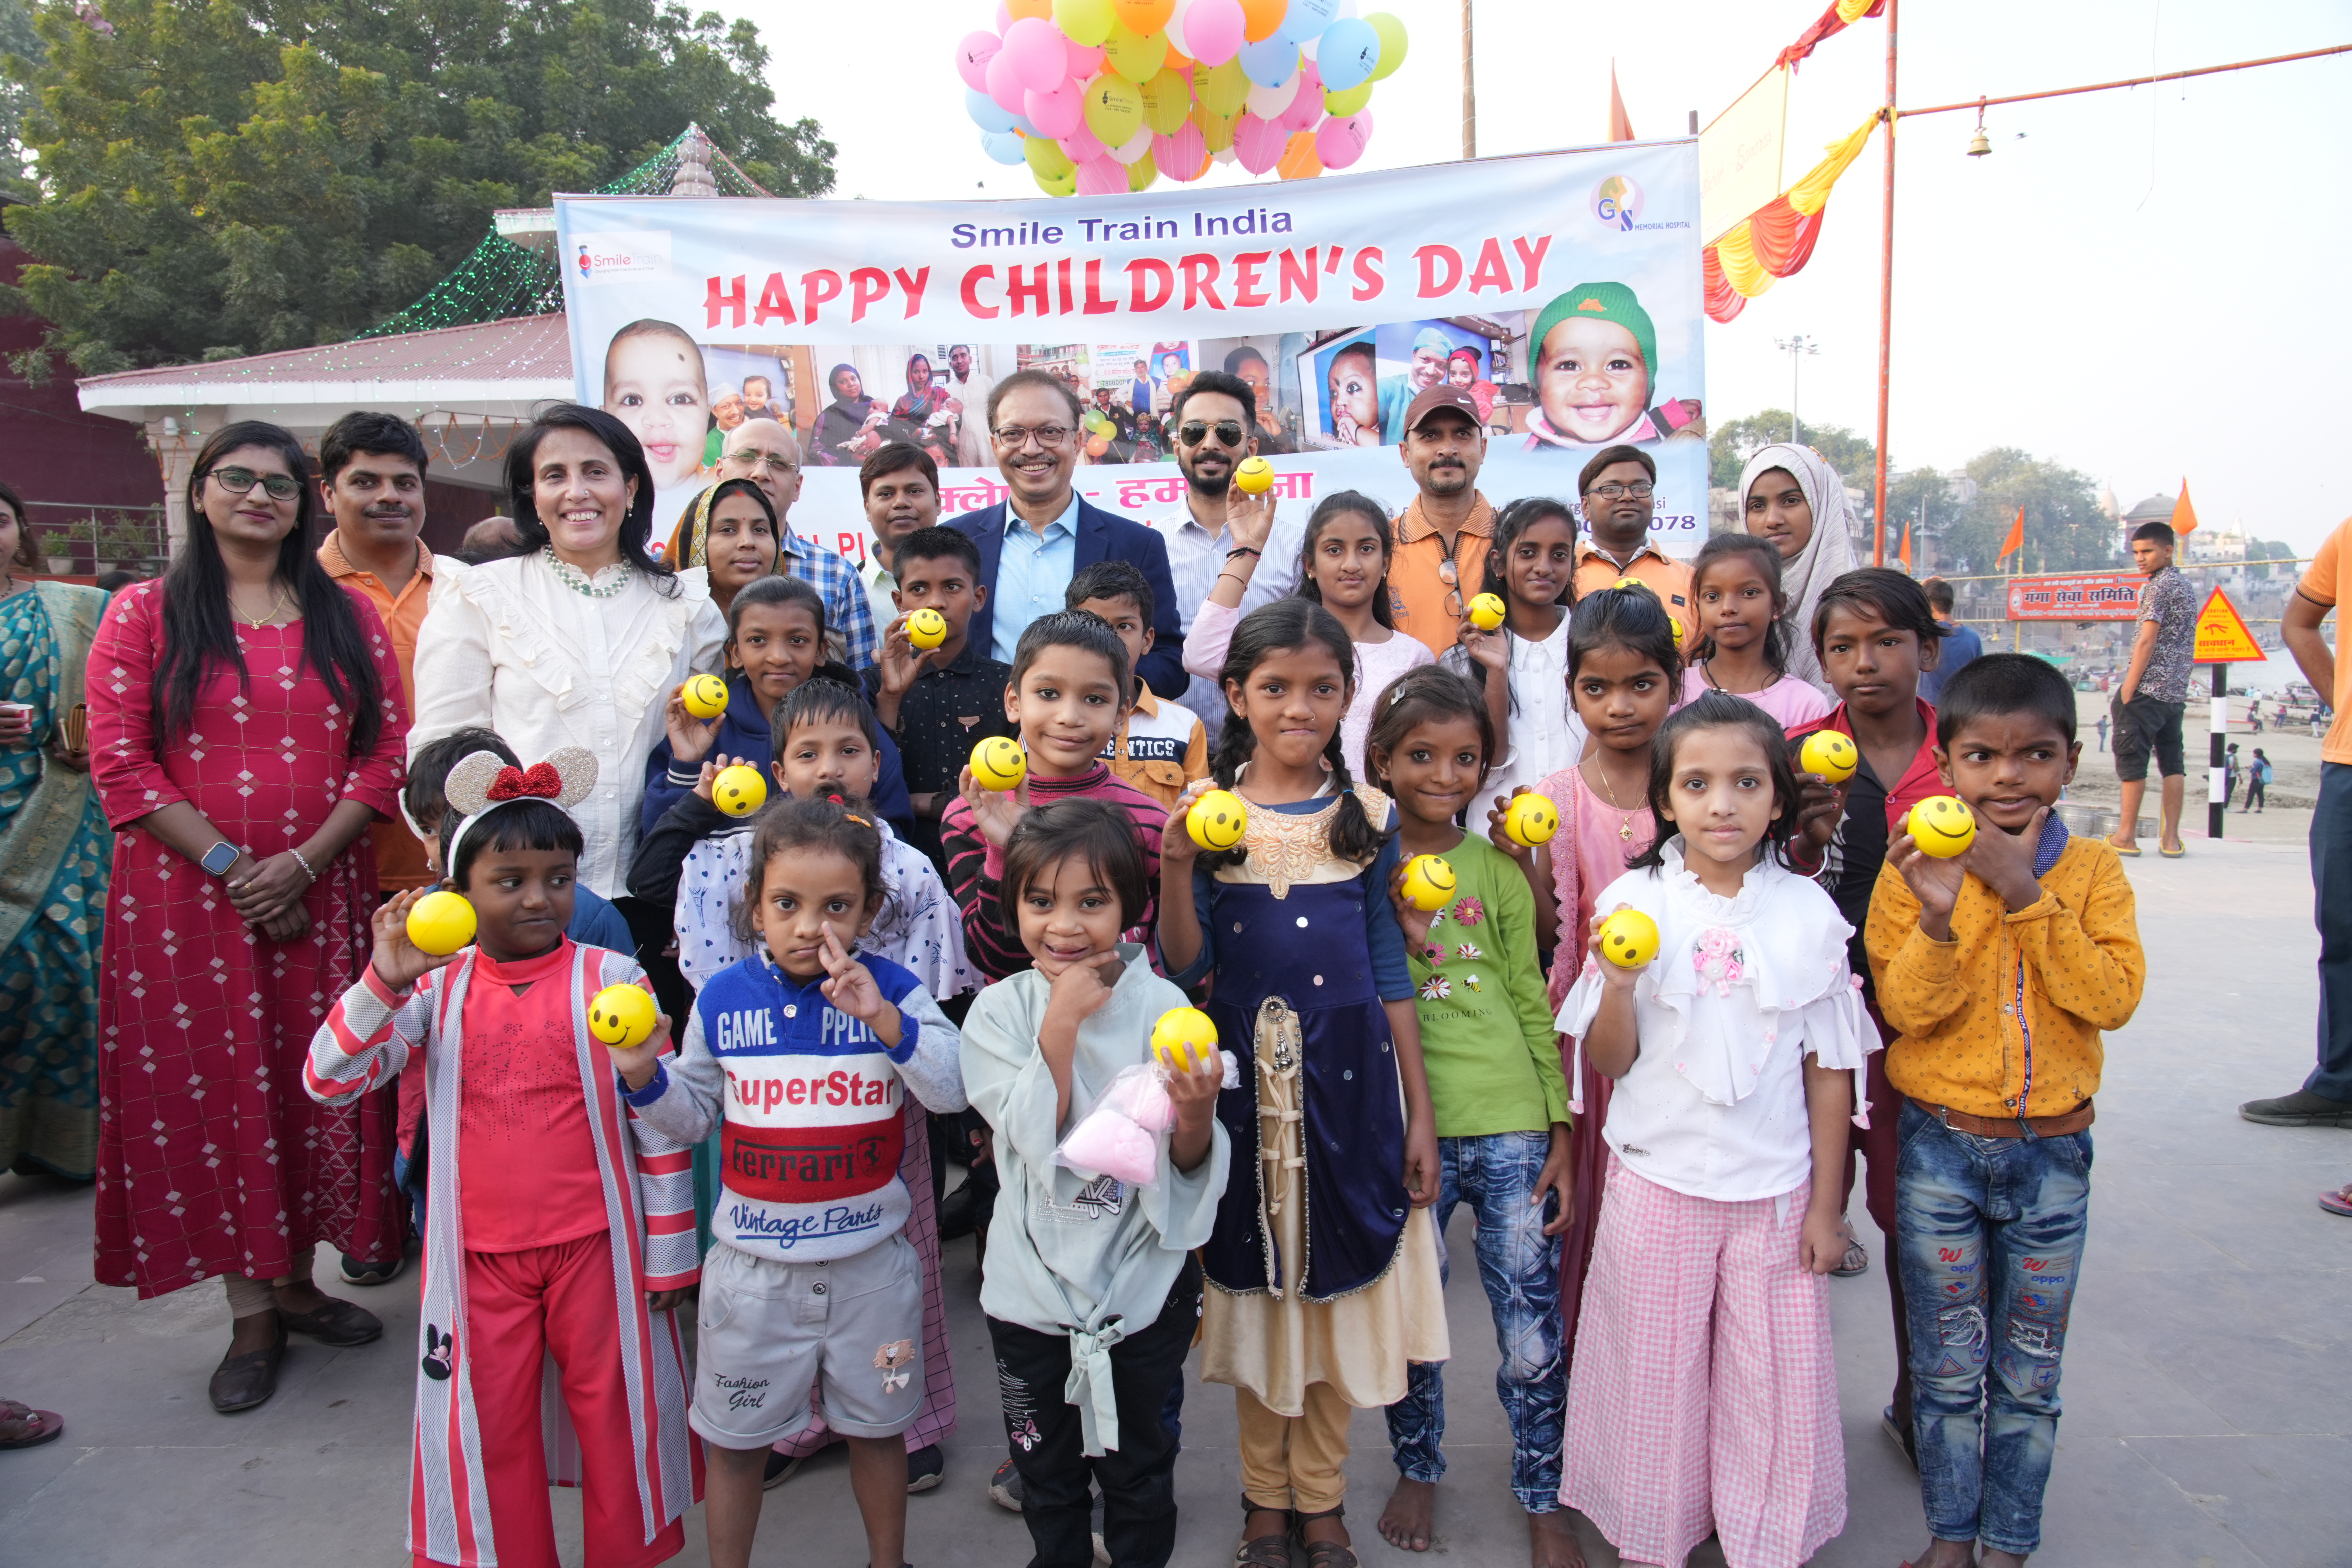 Dr Subodh celebrating Children's Day with kids